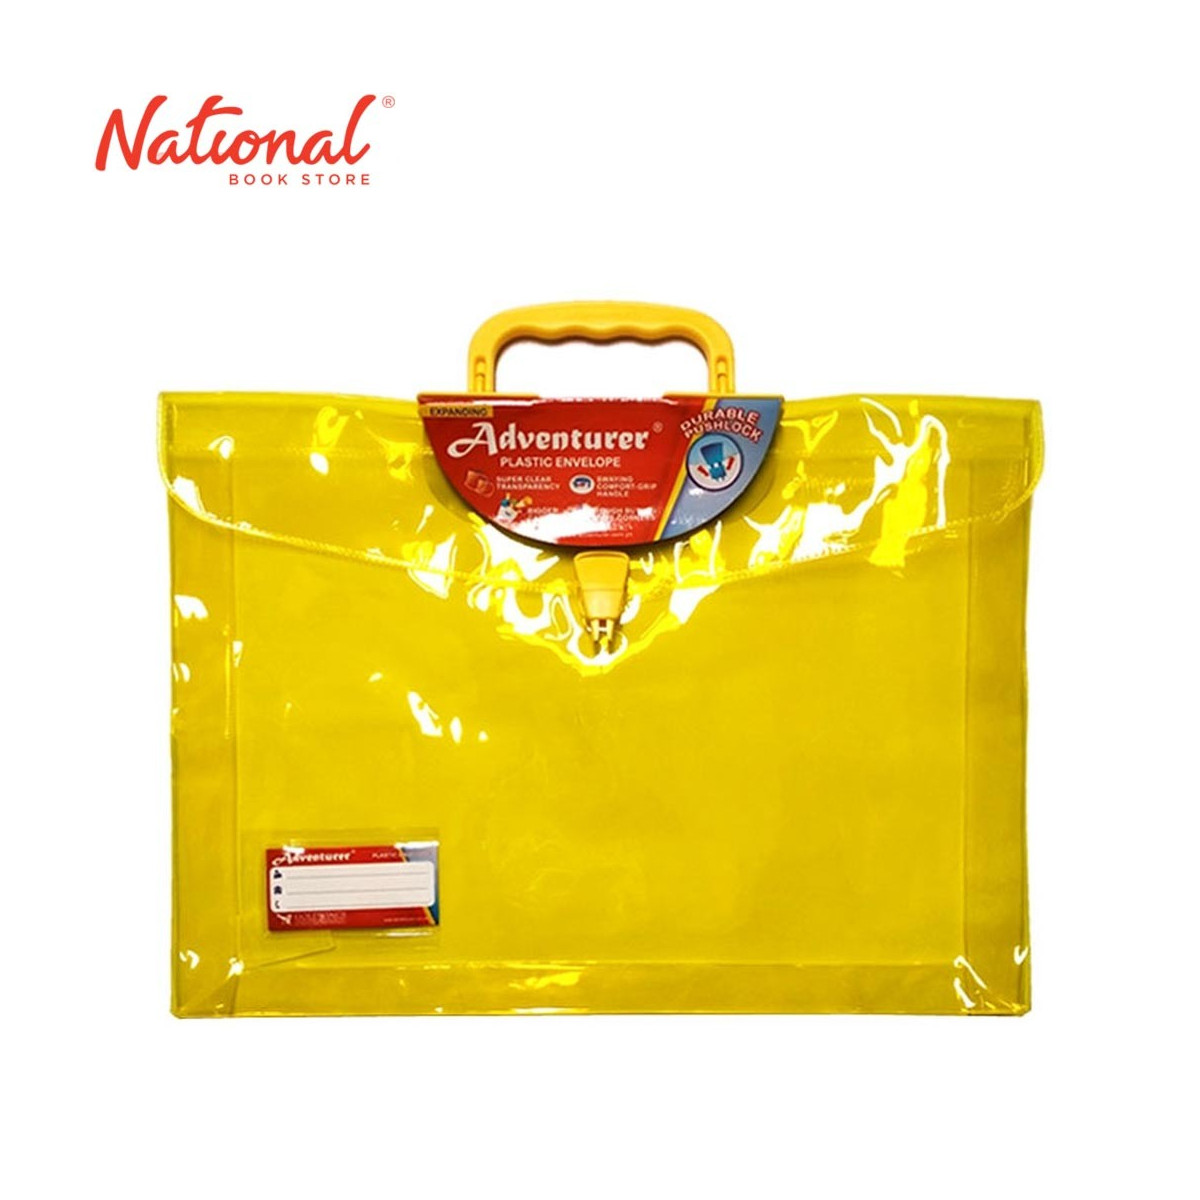 ADVENTURER PLASTIC ENVELOPE EXPANDING WITH HANDLE E13LWH  LONG PUSH LOCK COLORED TRANSPARENT, YELLOW